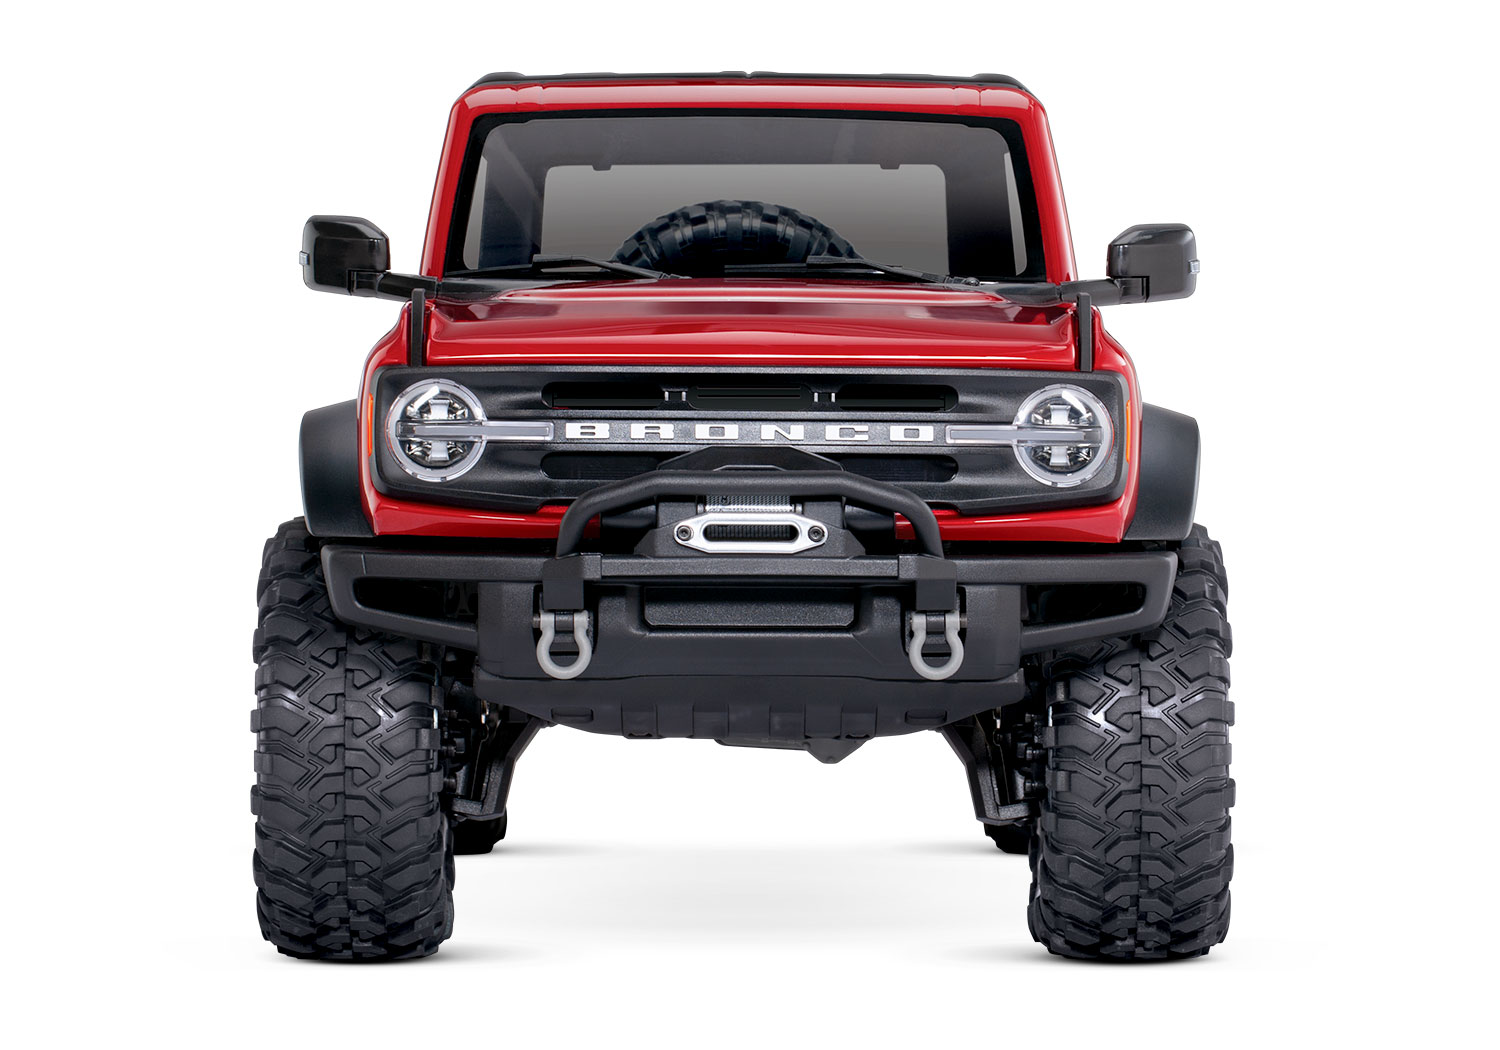 Ford Bronco Traxxas RC Bronco announced. Maybe I can at least get thisto tide me over... 87BD055C-C0DF-433D-80AE-EEBD9D17C831